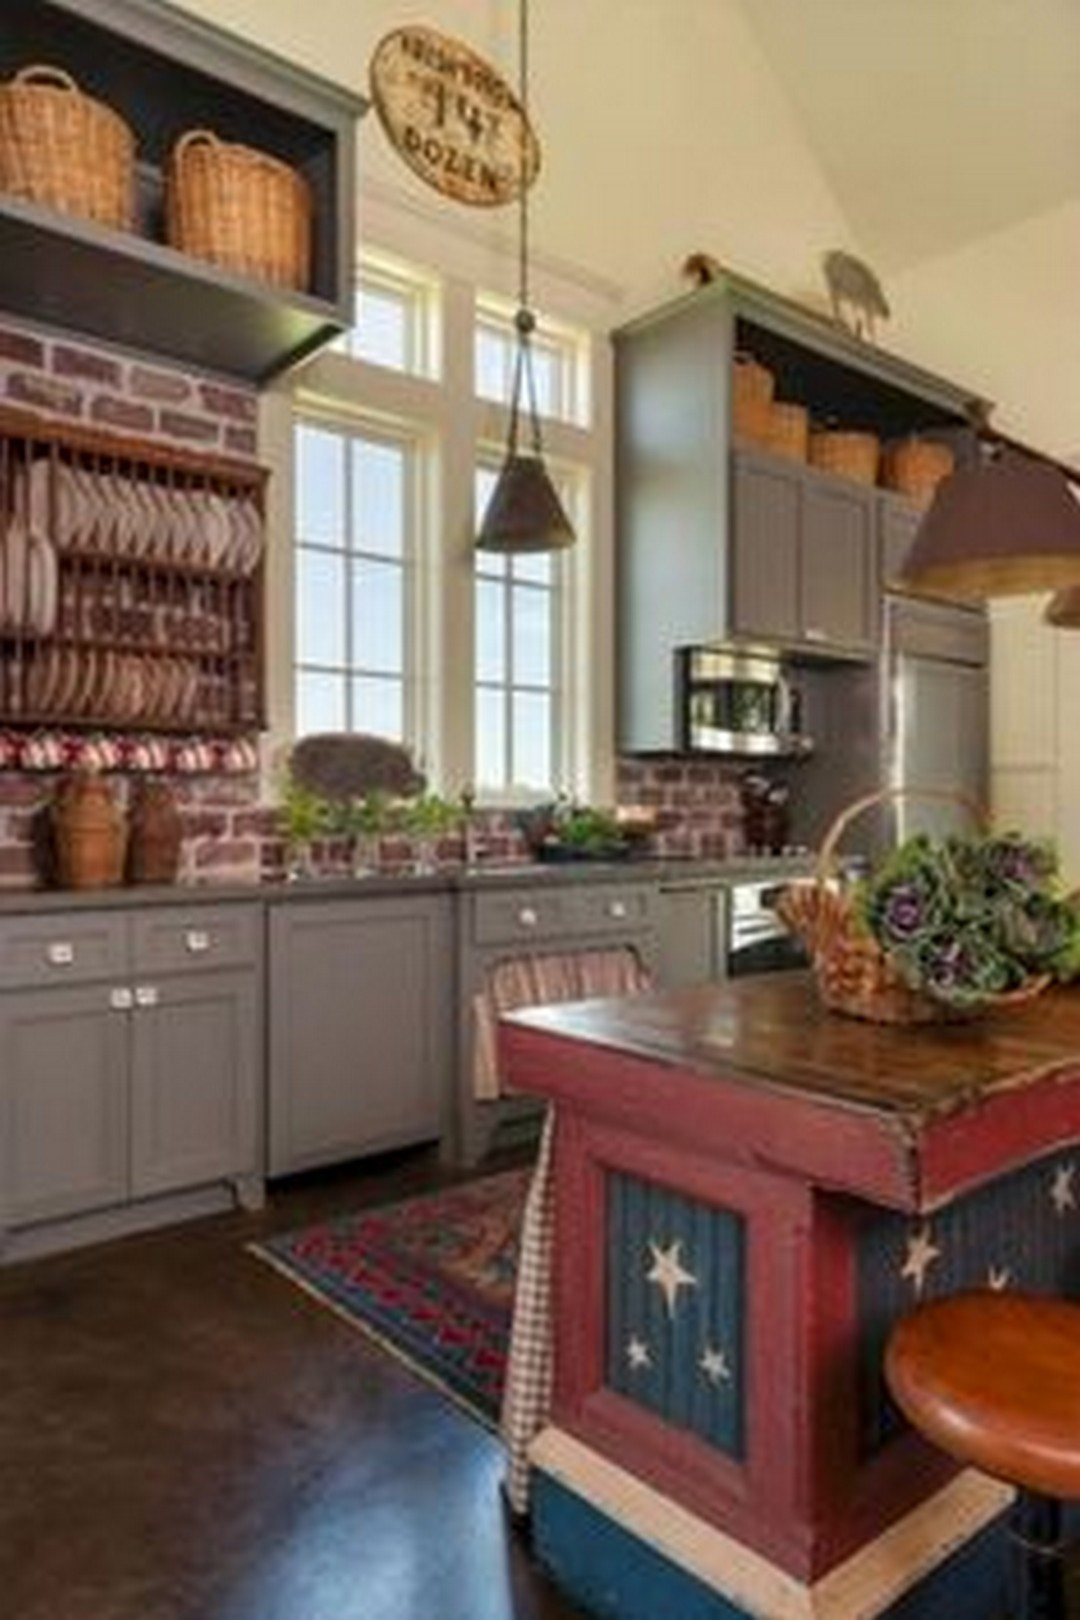 Rustic Farmhouse Kitchen
 How to Easily Set a Rustic Farmhouse Style Kitchen in Your